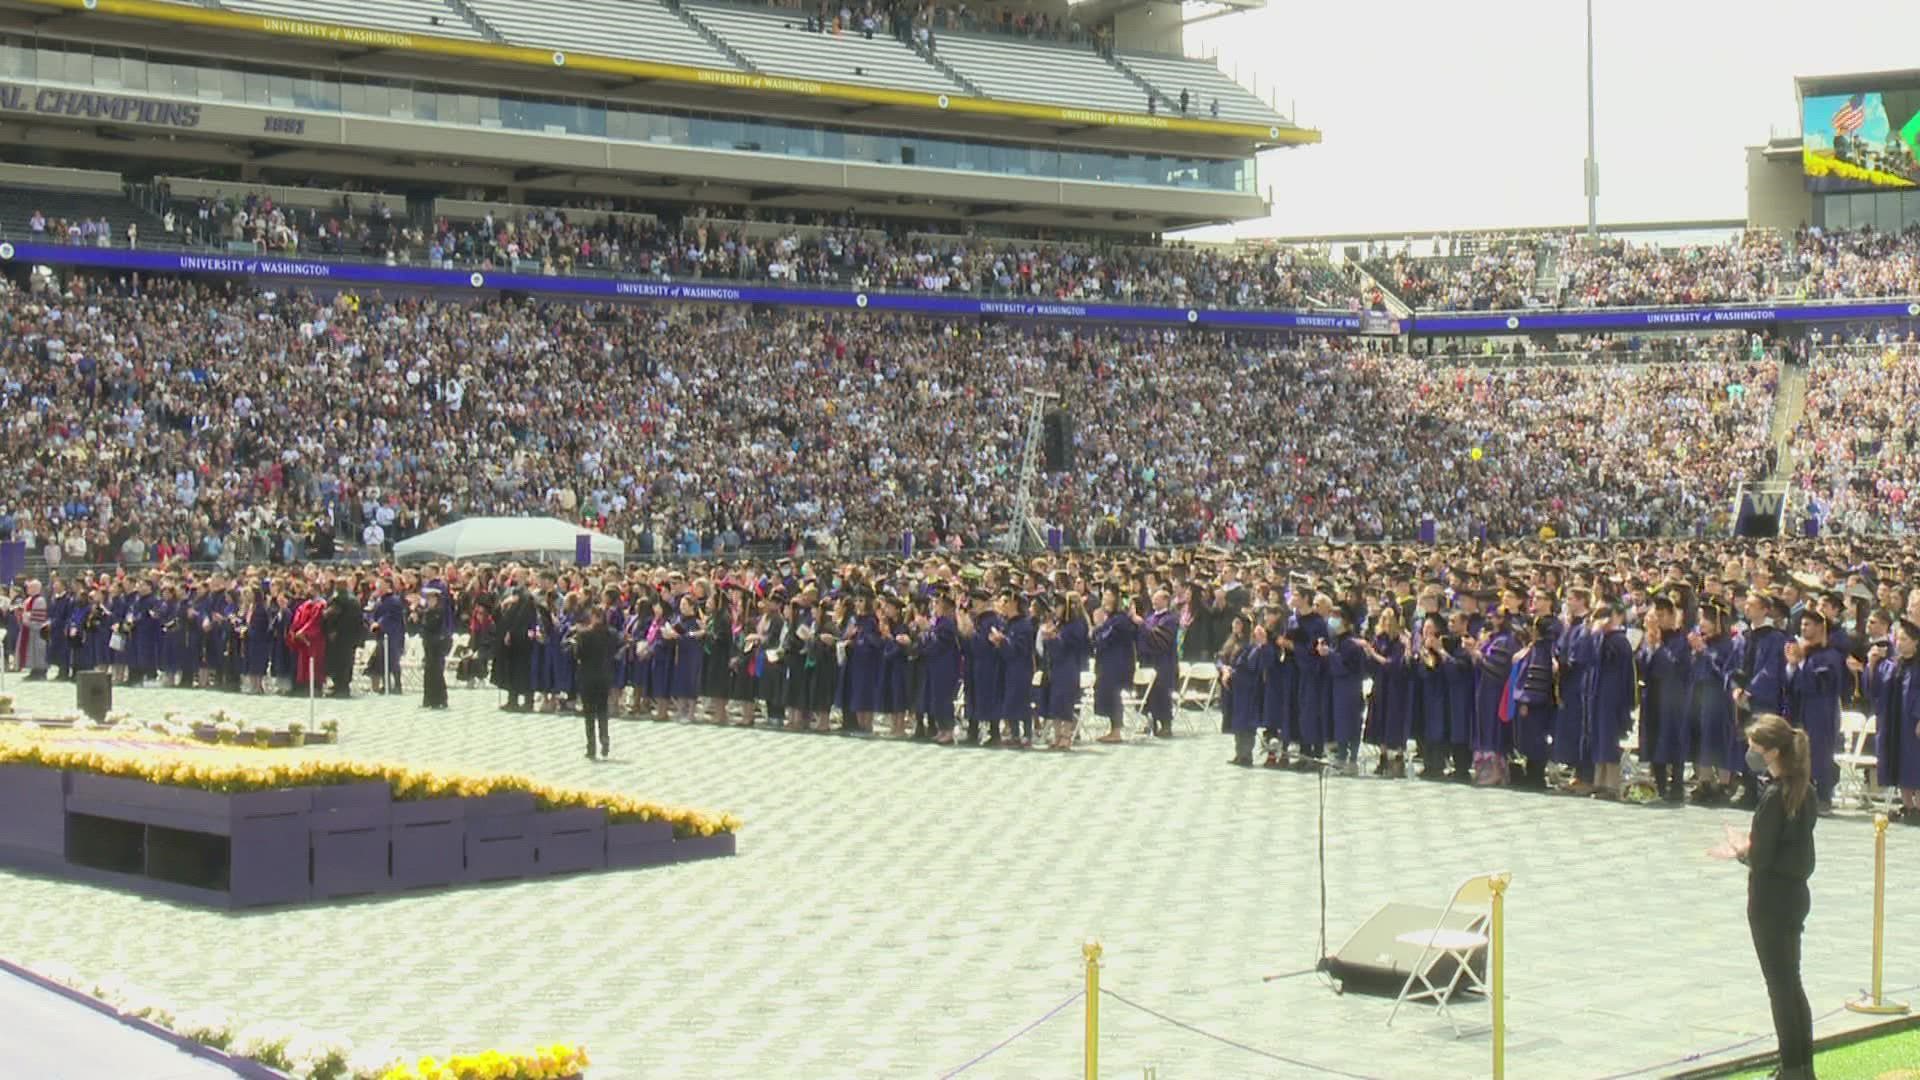 An estimated 50,000 spectators flocked to Seattle to celebrate UW's first in-person commencement ceremony since 2019.